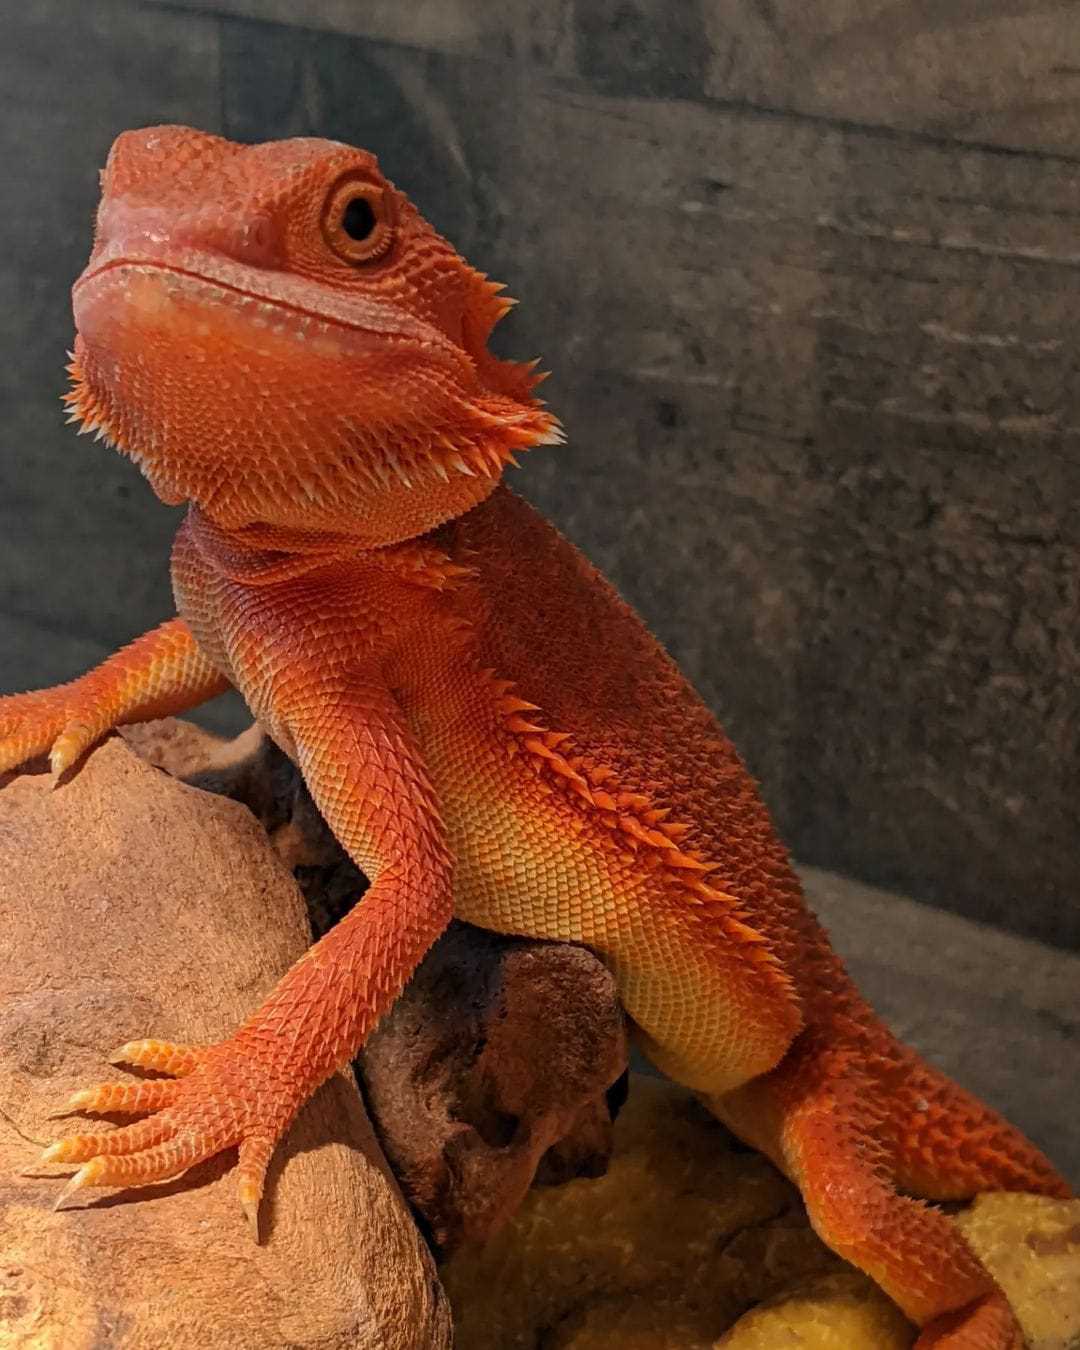 Black and red bearded dragon